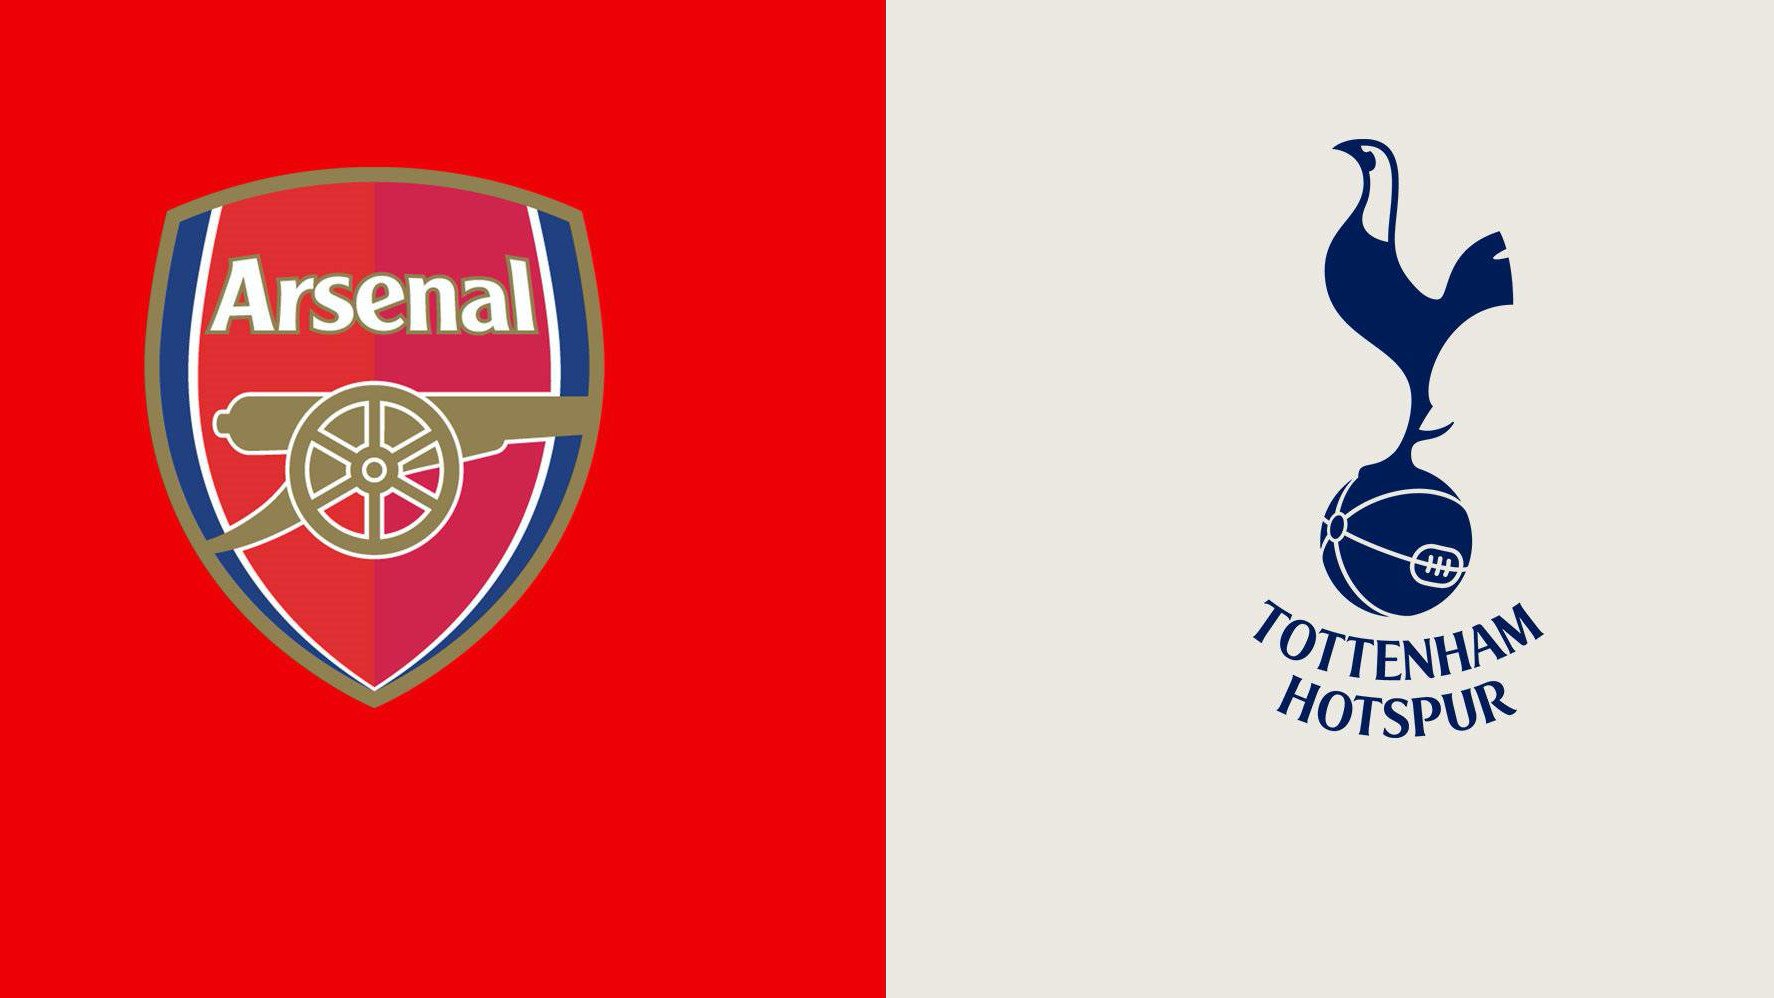 Arsenal vs Tottenham live stream How to watch the Premier League match online from anywhere Android Central